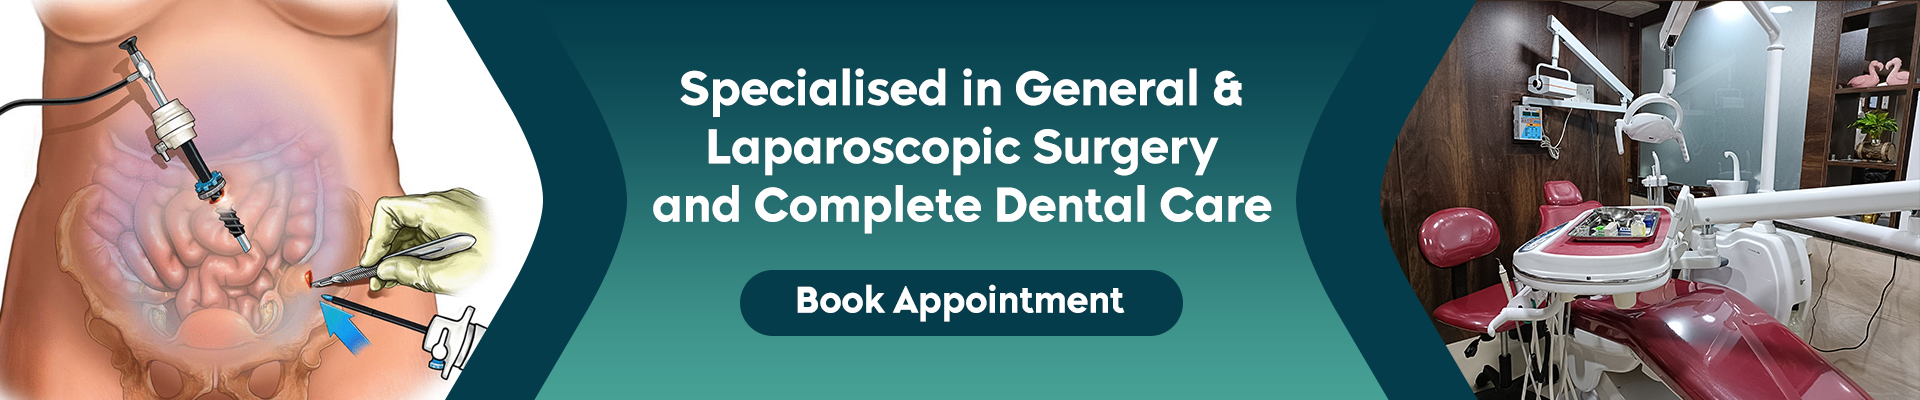 Specialized in General and Laproscopic surgery and complete dental care